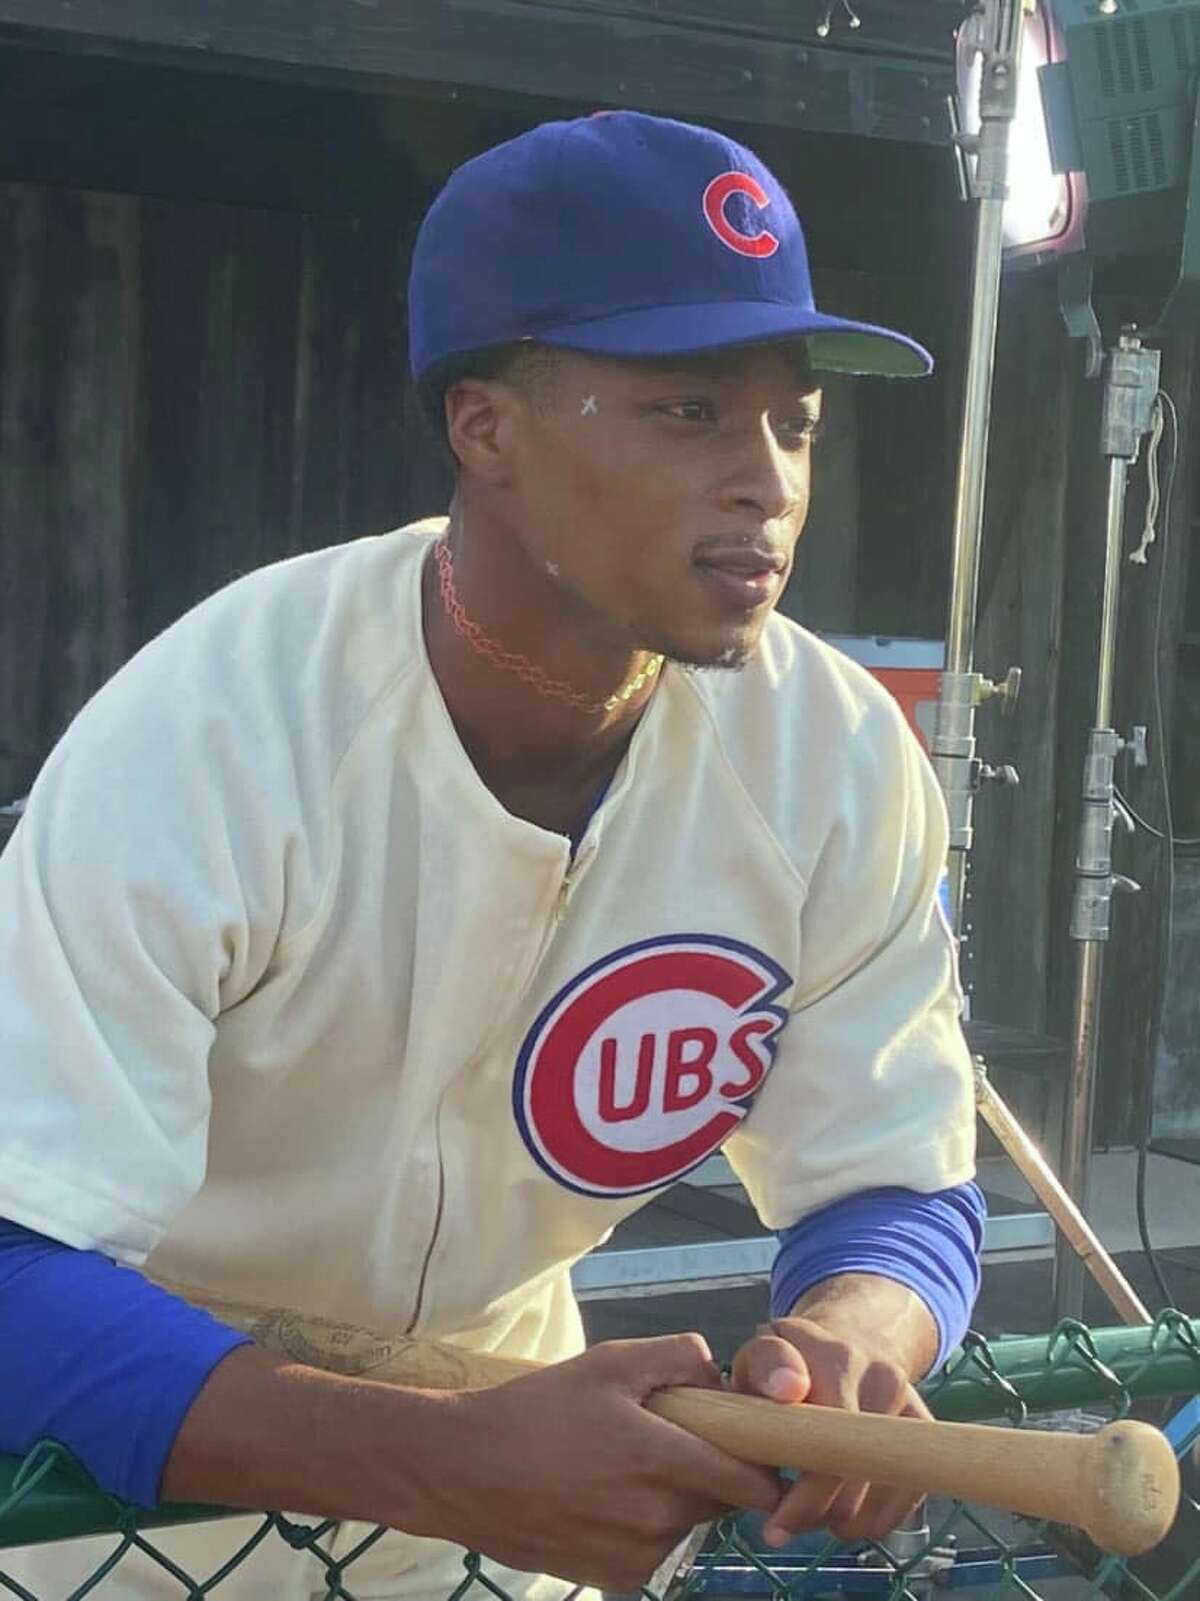 Edwardsville High School graduate Shawn Roundtree Jr. portrayed former Cubs legend Ernie Banks for a production at the MLB of Dreams game.